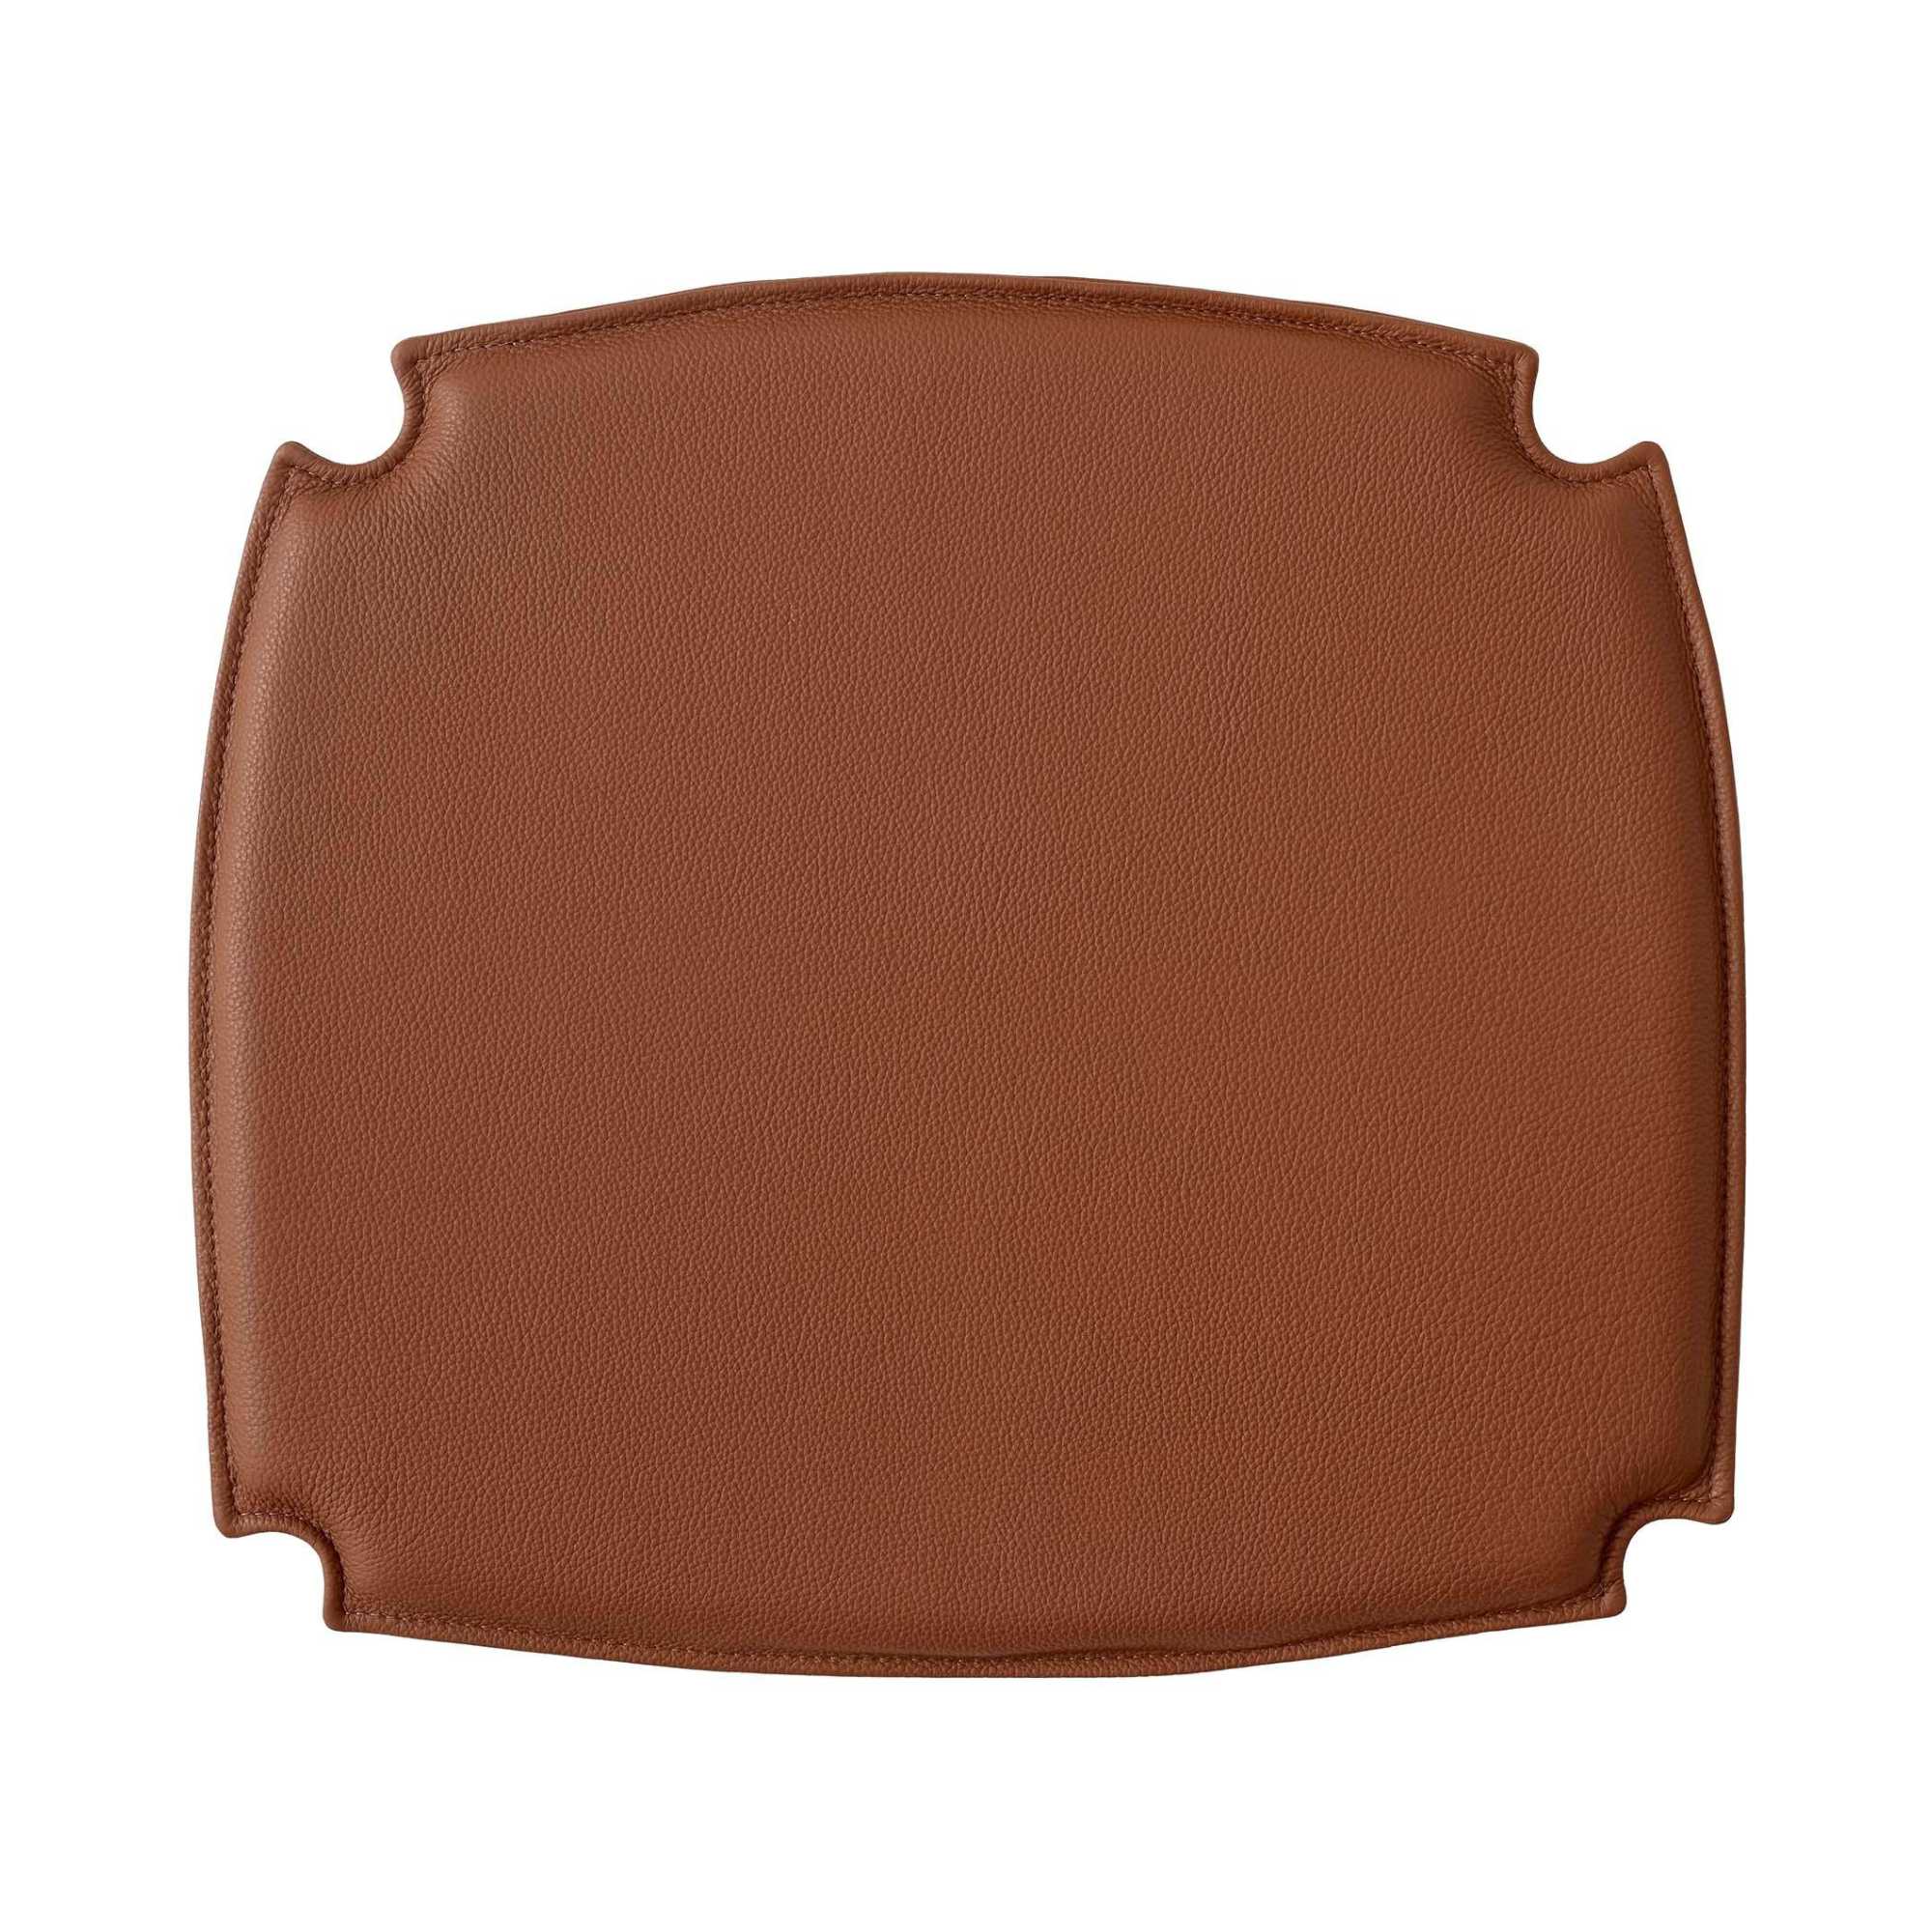 &Tradition Seat Pad for HM3 Drawn Chair, cognac leather